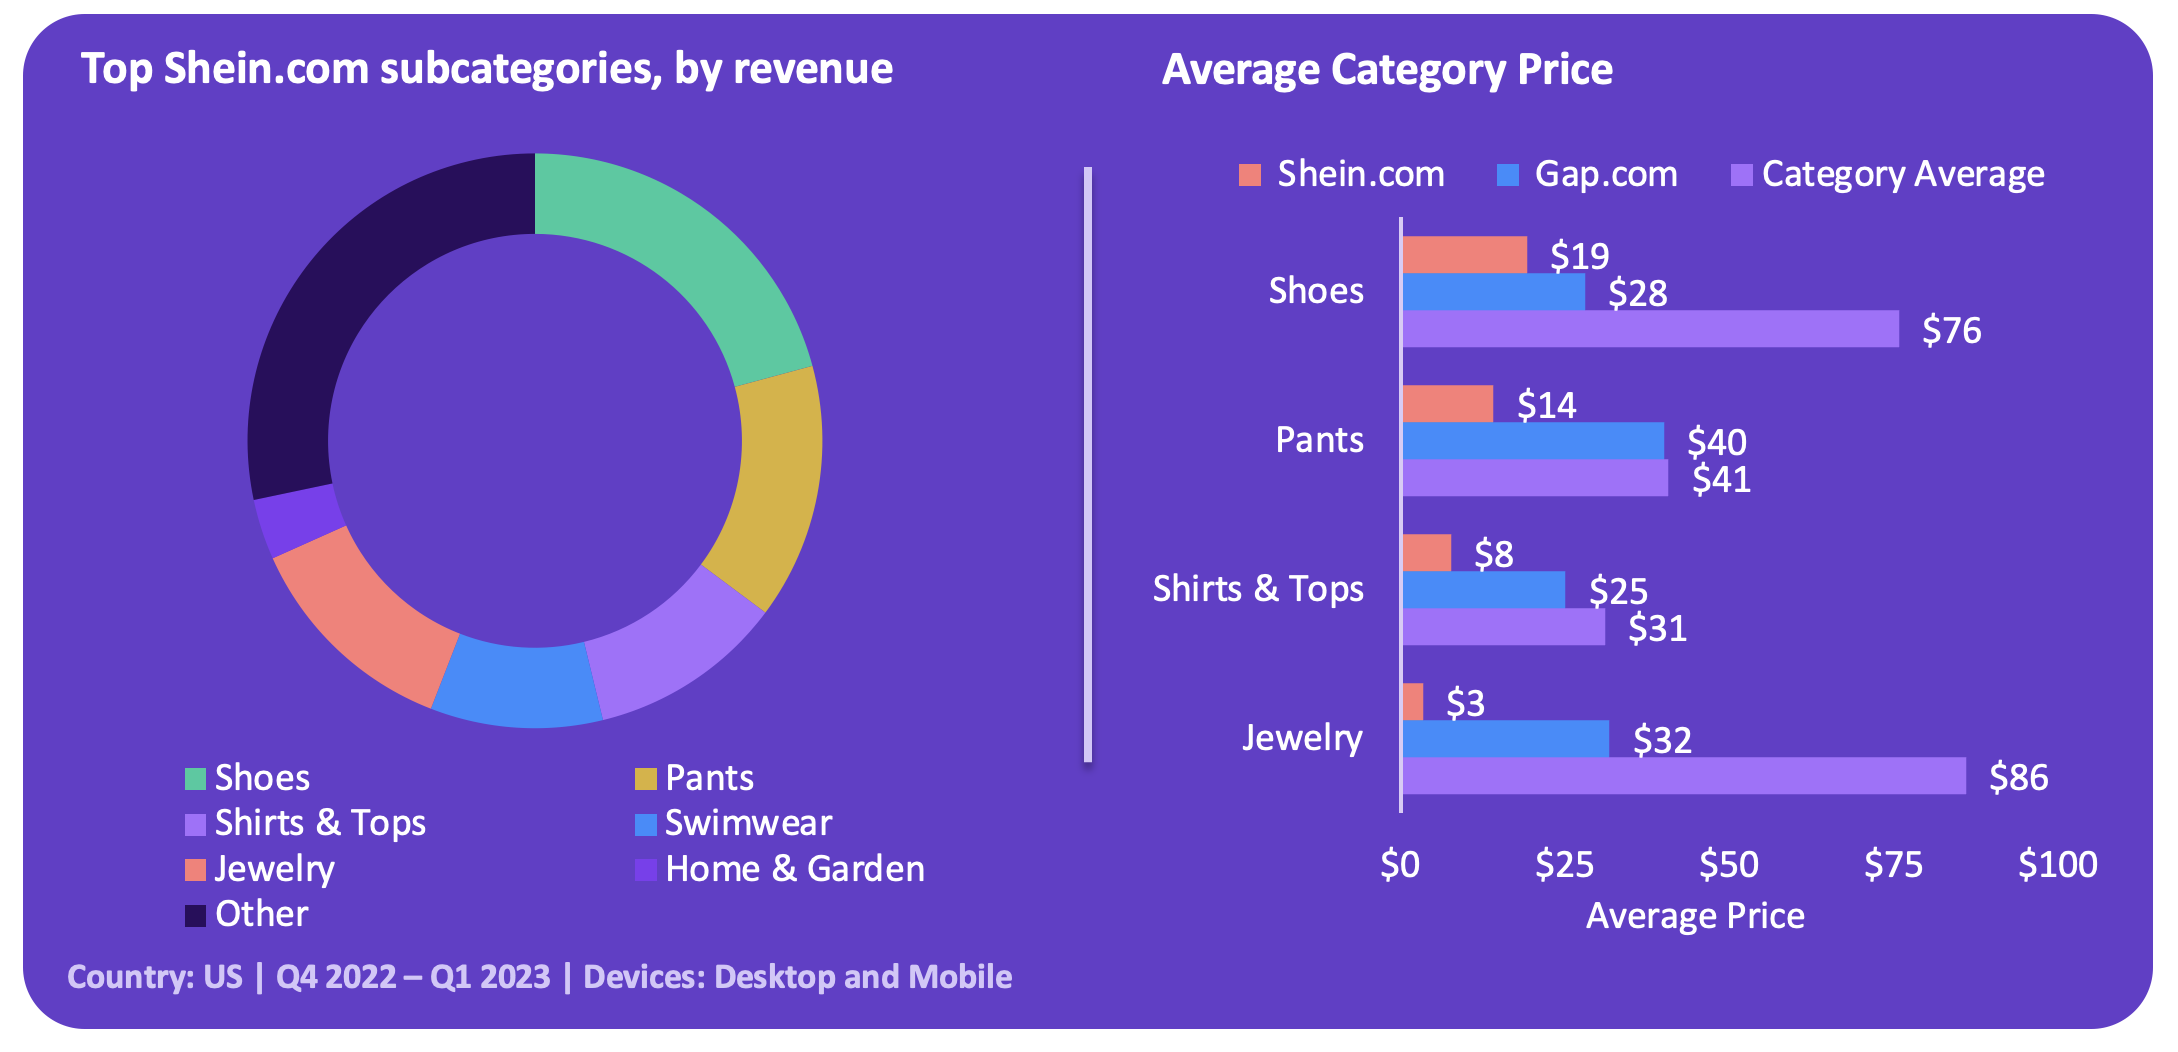 Top Shein.com subcategories, by revenue and average price